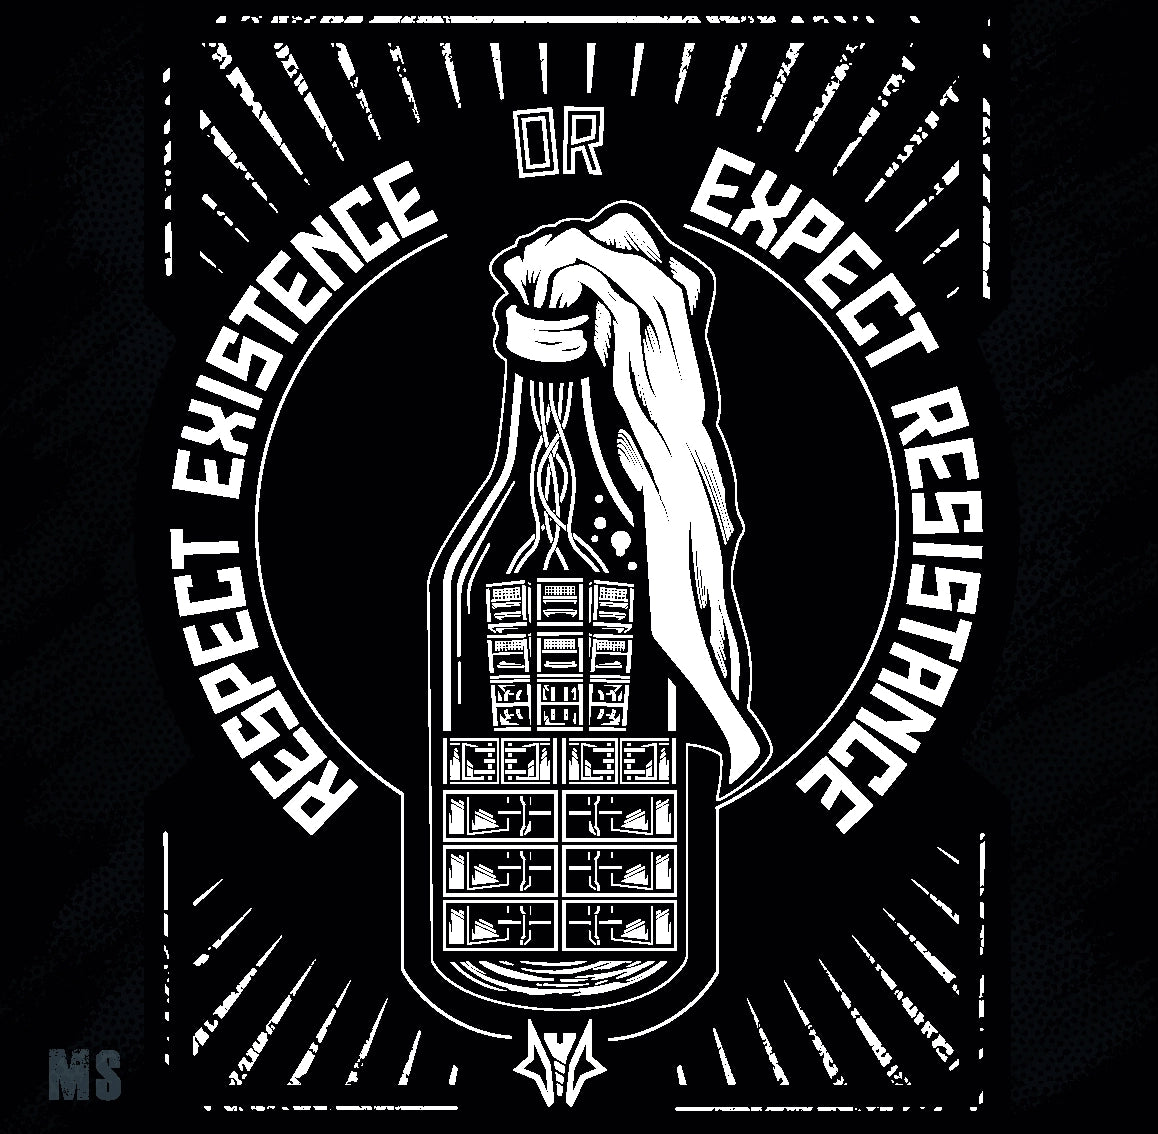 Design for Tekno 23 Clothes, shows a Molotov cocktails out of a freetekno soundsystem and the slogan "respect existence or expect resistance"